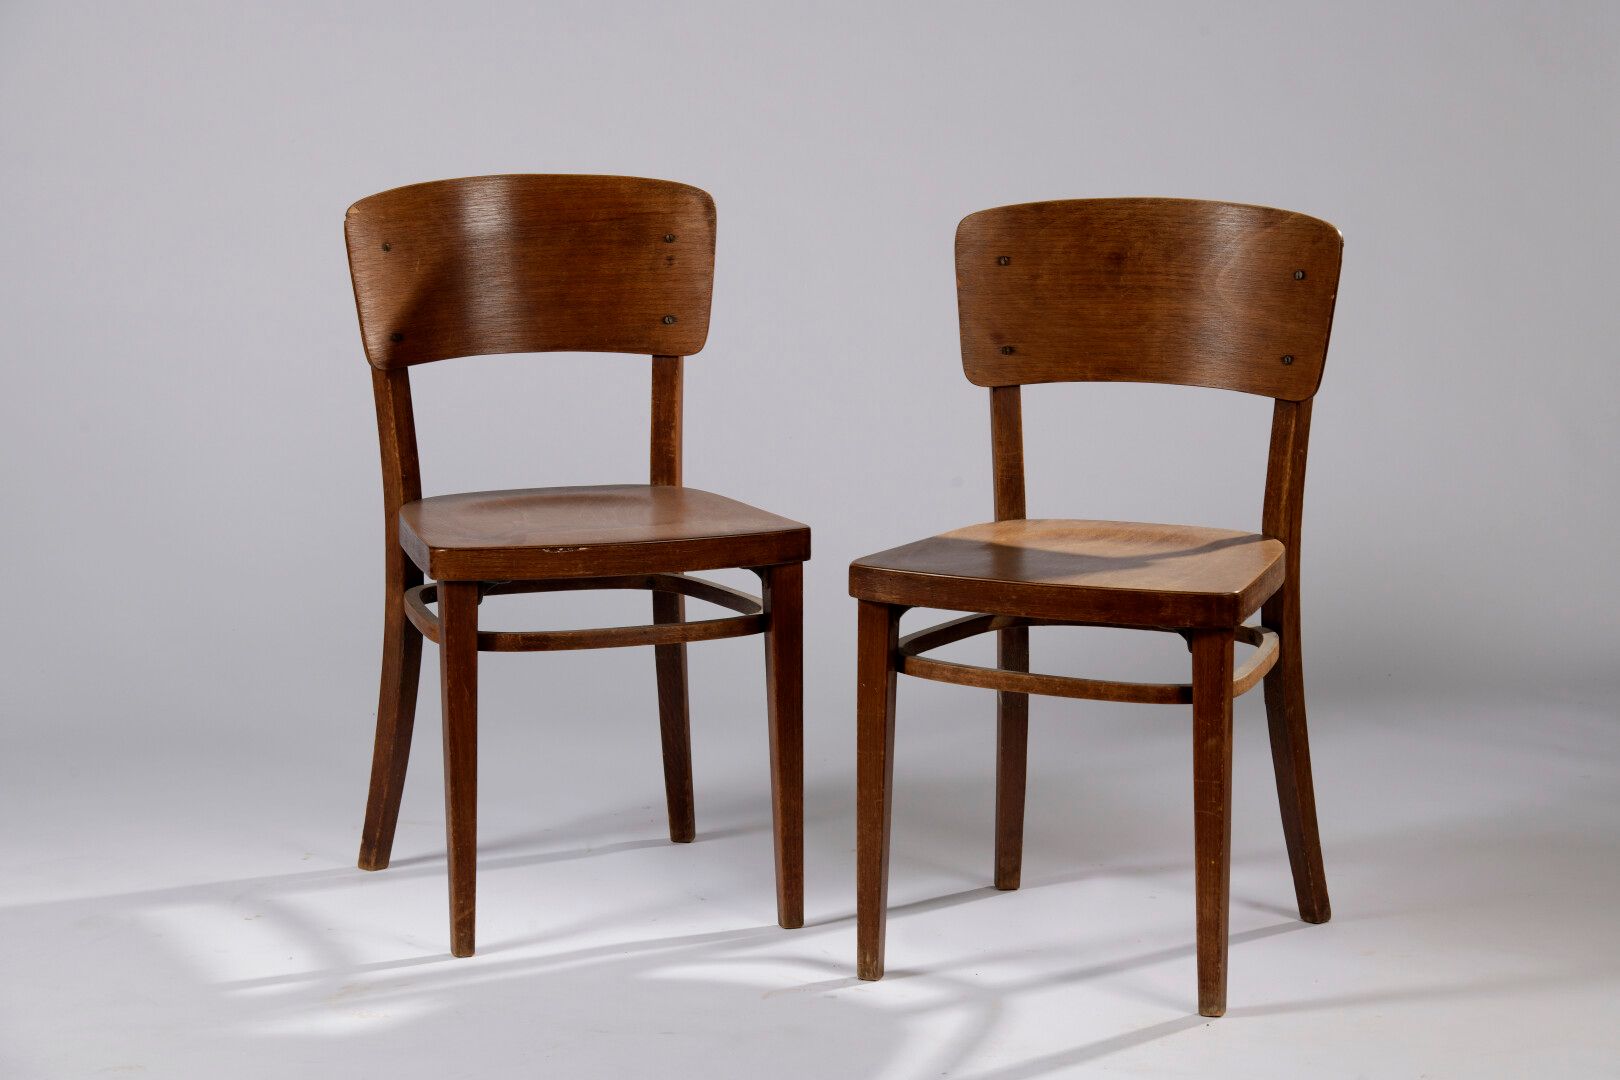 Null Marcel GASCOIN (1907-1990), attributed to. Pair of chairs.

Thermoformed pl&hellip;